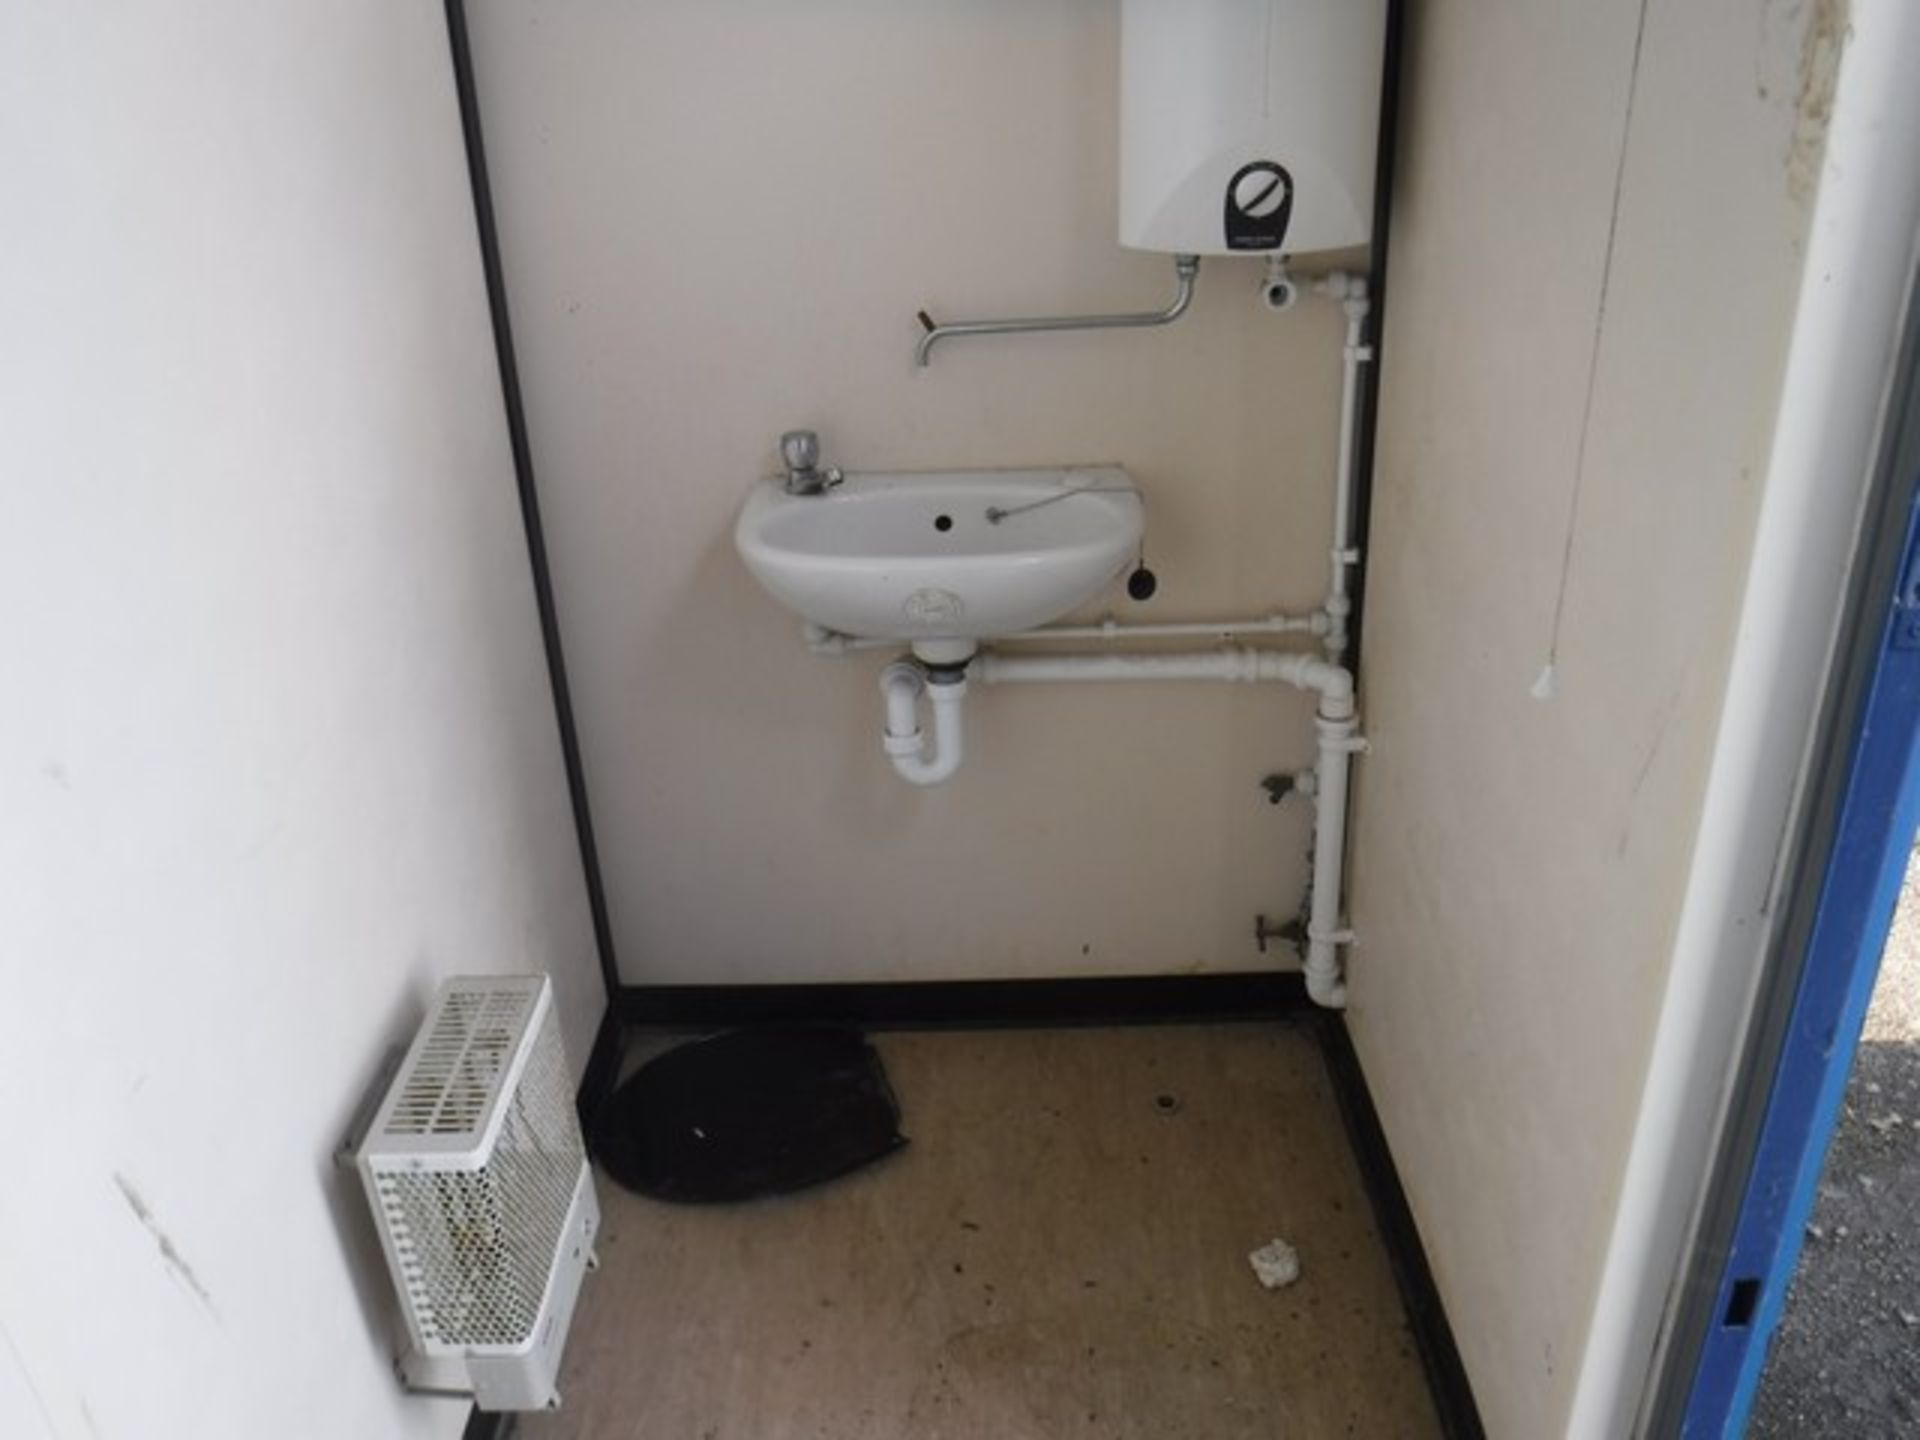 INTEGRA 32 x 10FT ANTI VANDAL UNIT C/W CANTEEN, DRYING ROOM AND END TOILET - Image 7 of 8